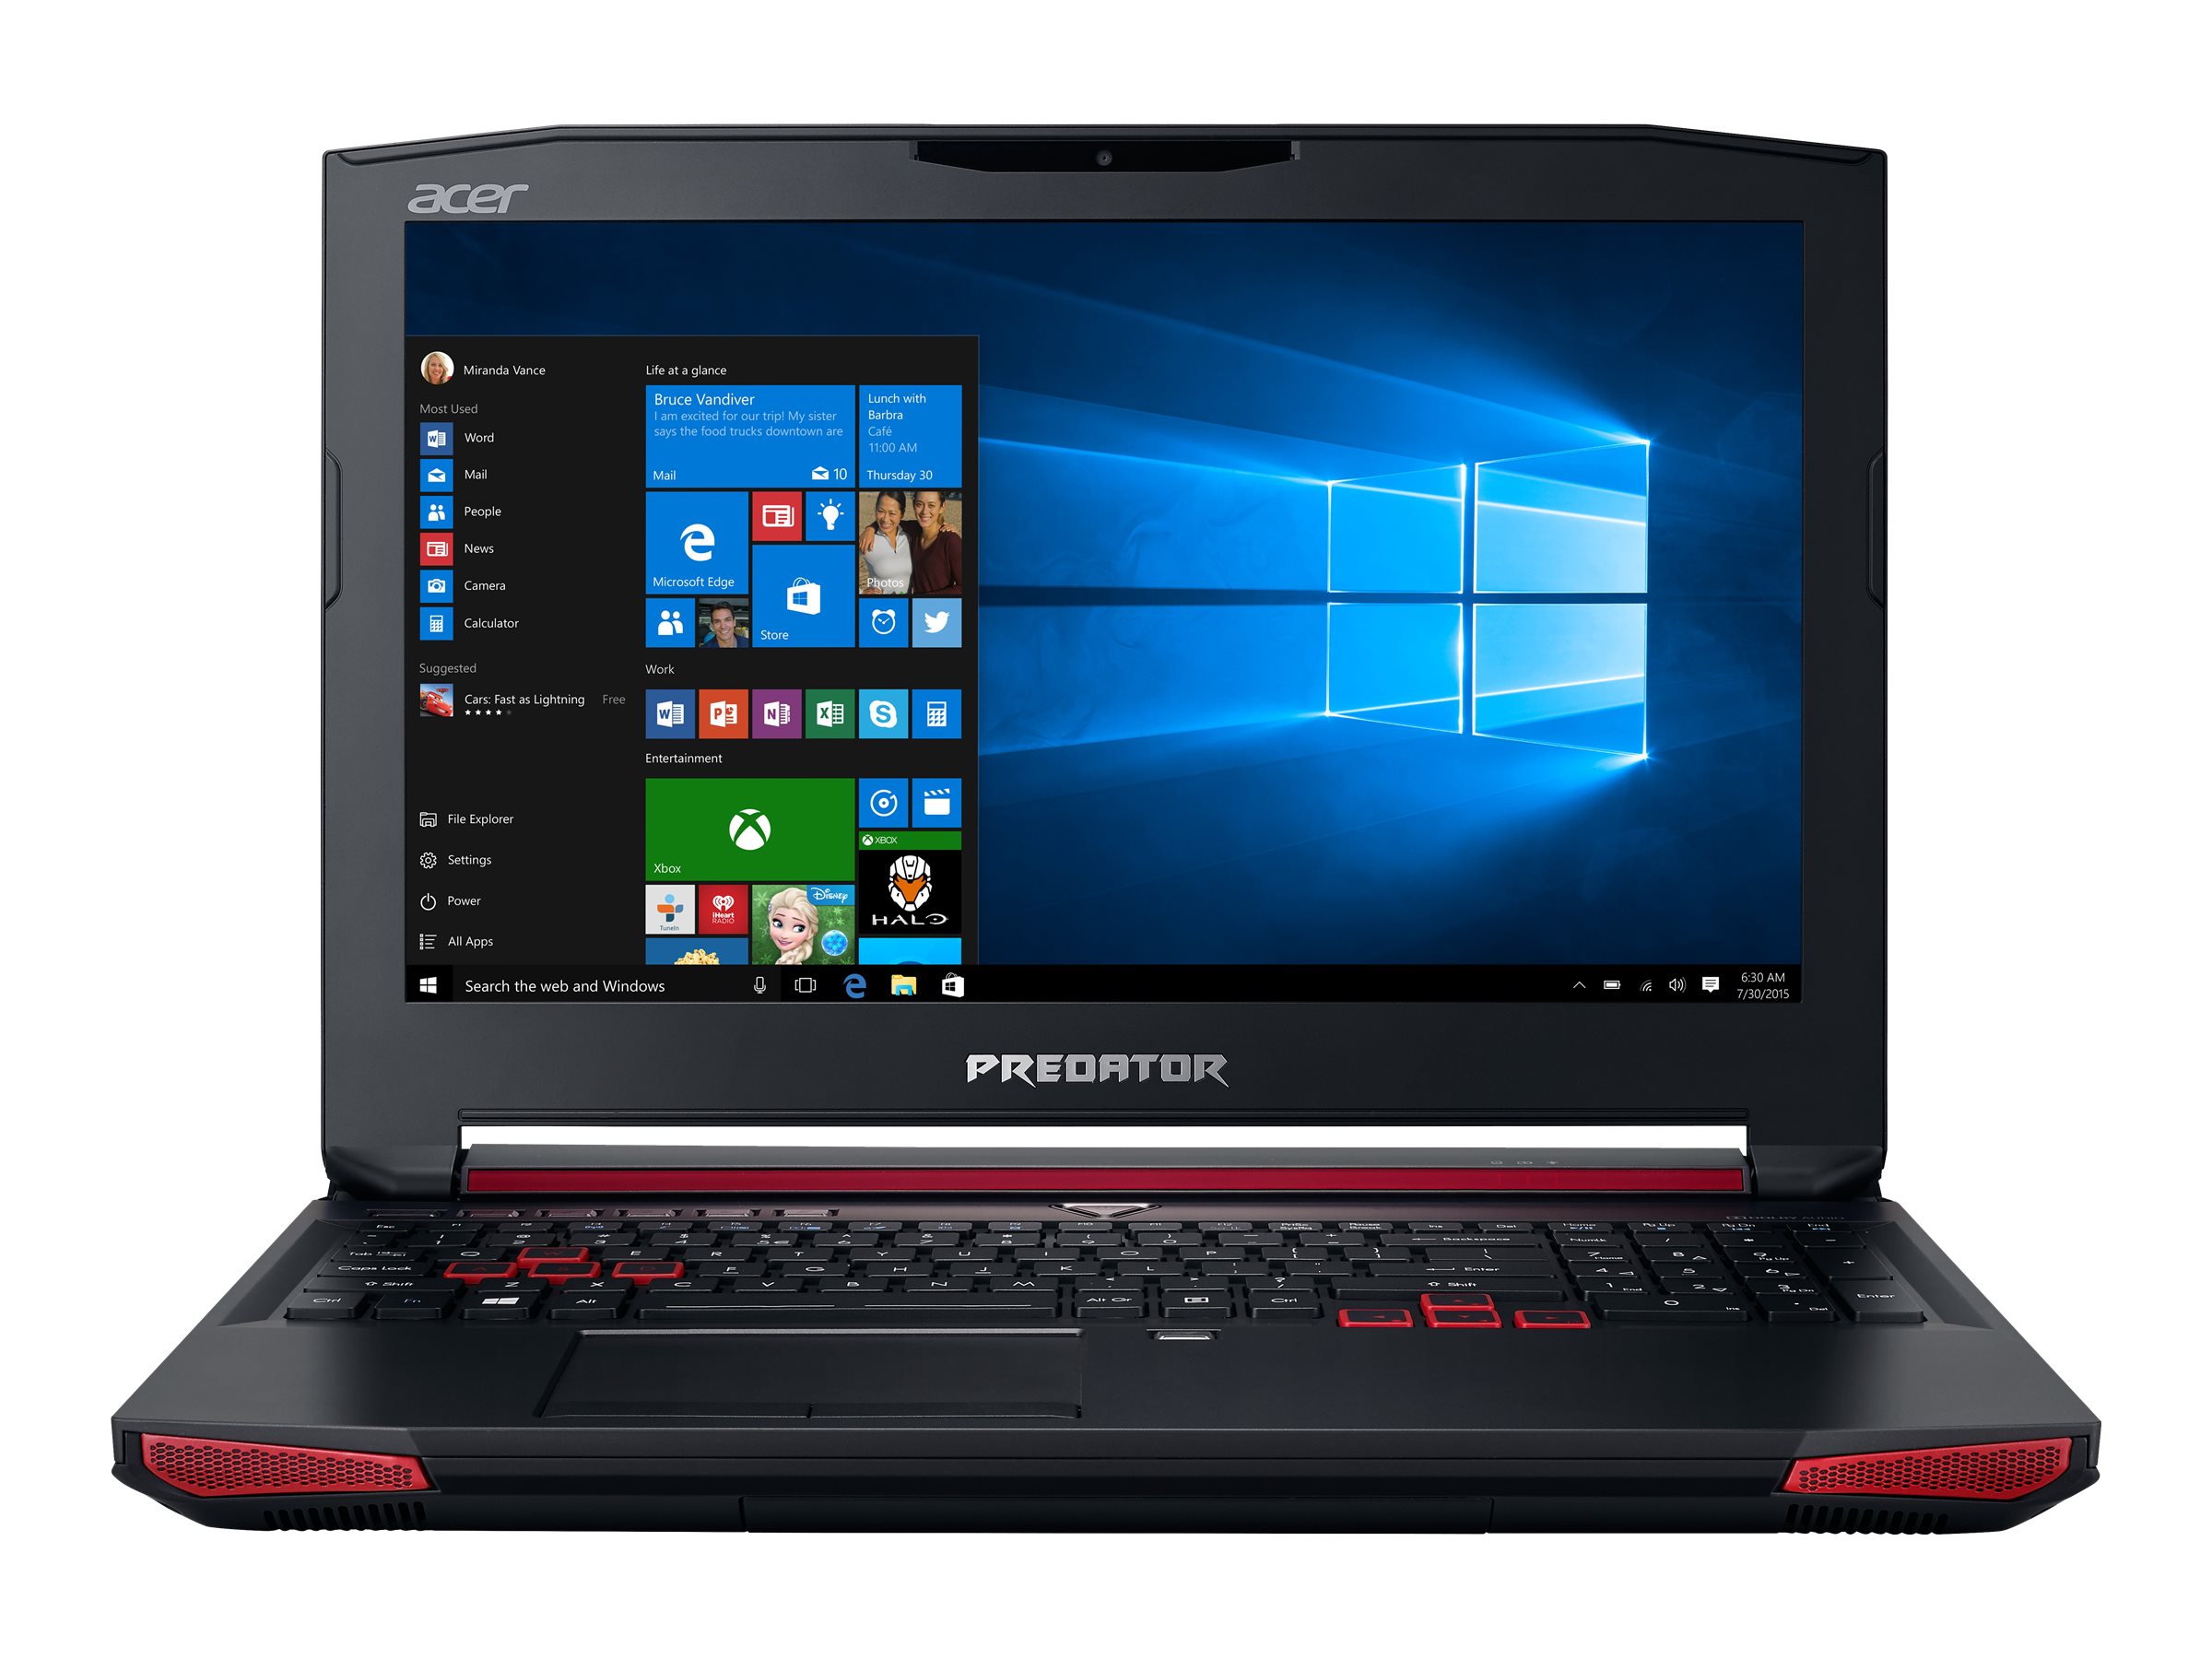 Acer Predator 15 (G9-592) - full specs, details and review